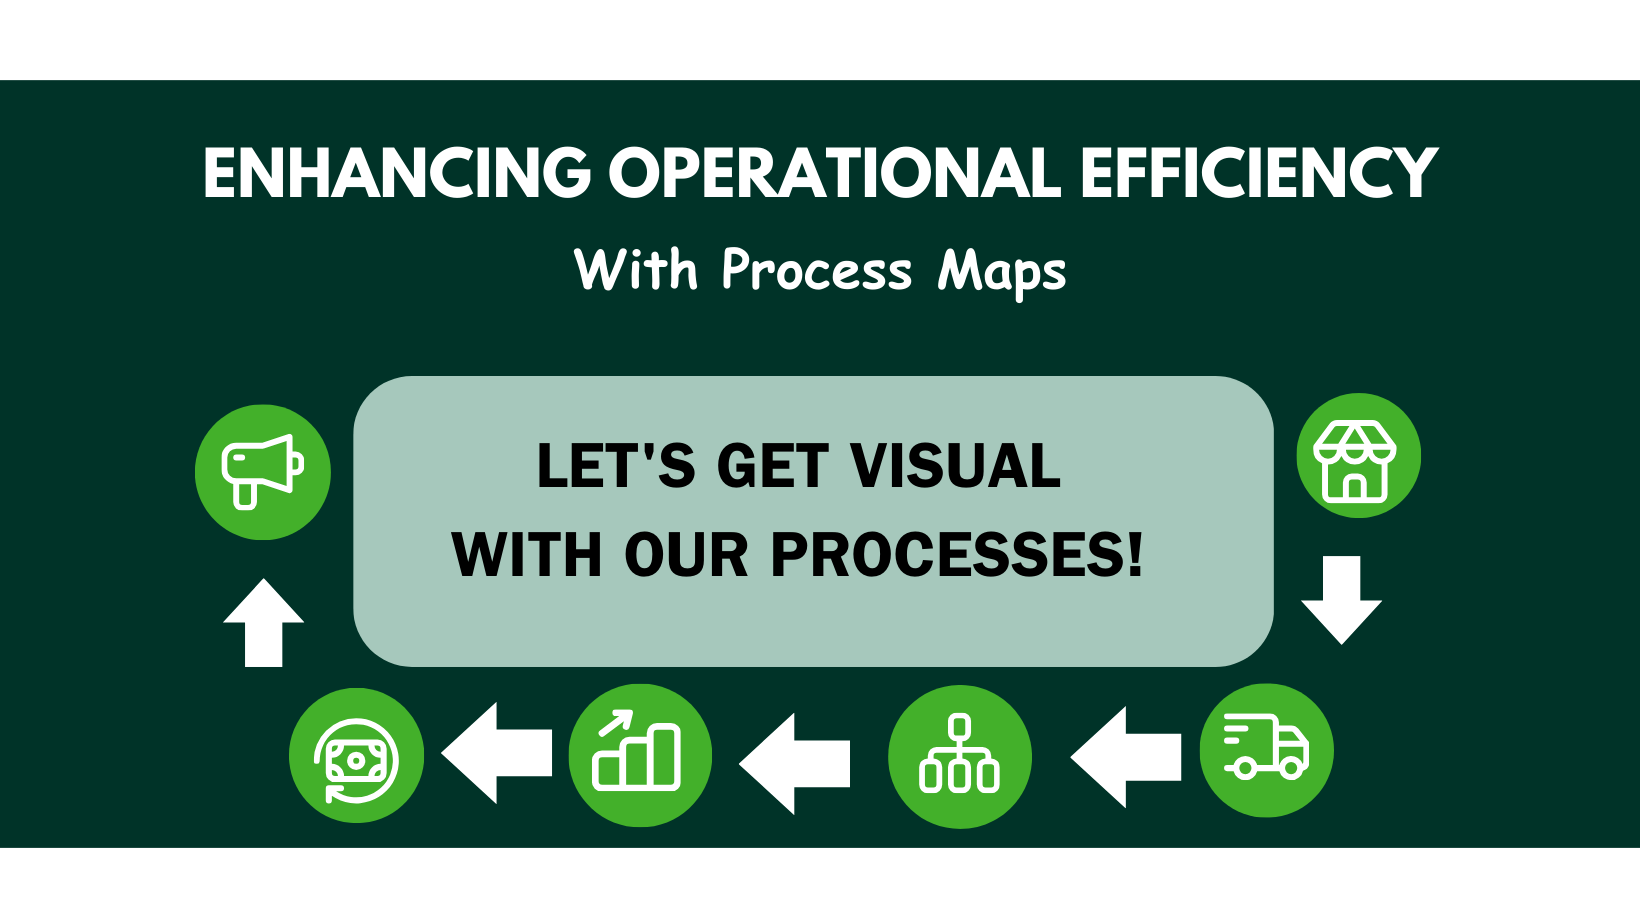 Enhancing operational efficiency with process maps: 
Let's get visual with our processes 